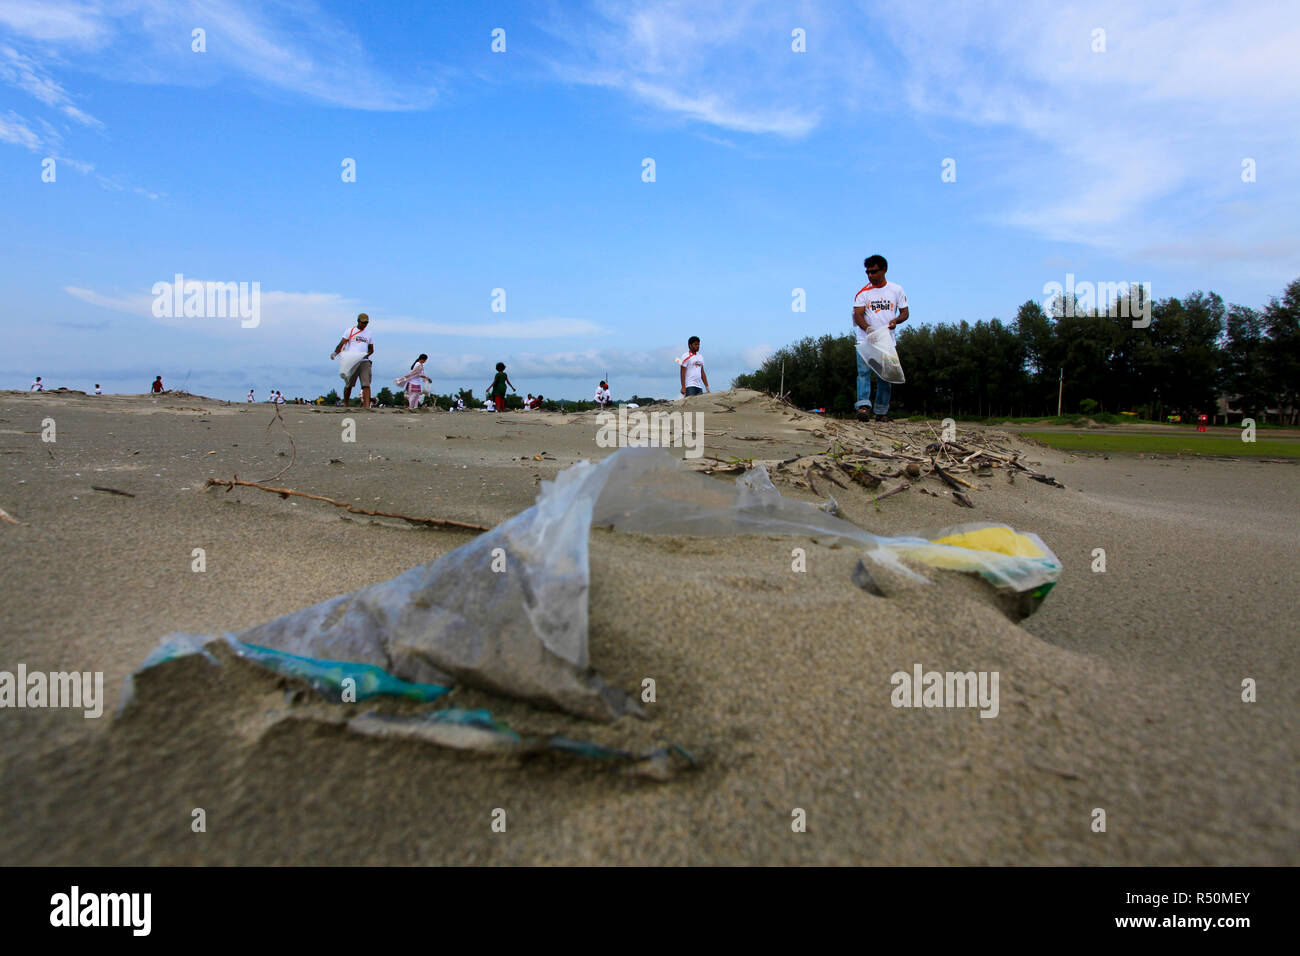 The International Coastal Cleanup Day is observed in Cox's Bazar. People participate in removing trash and debris from different beaches and waterways Stock Photo